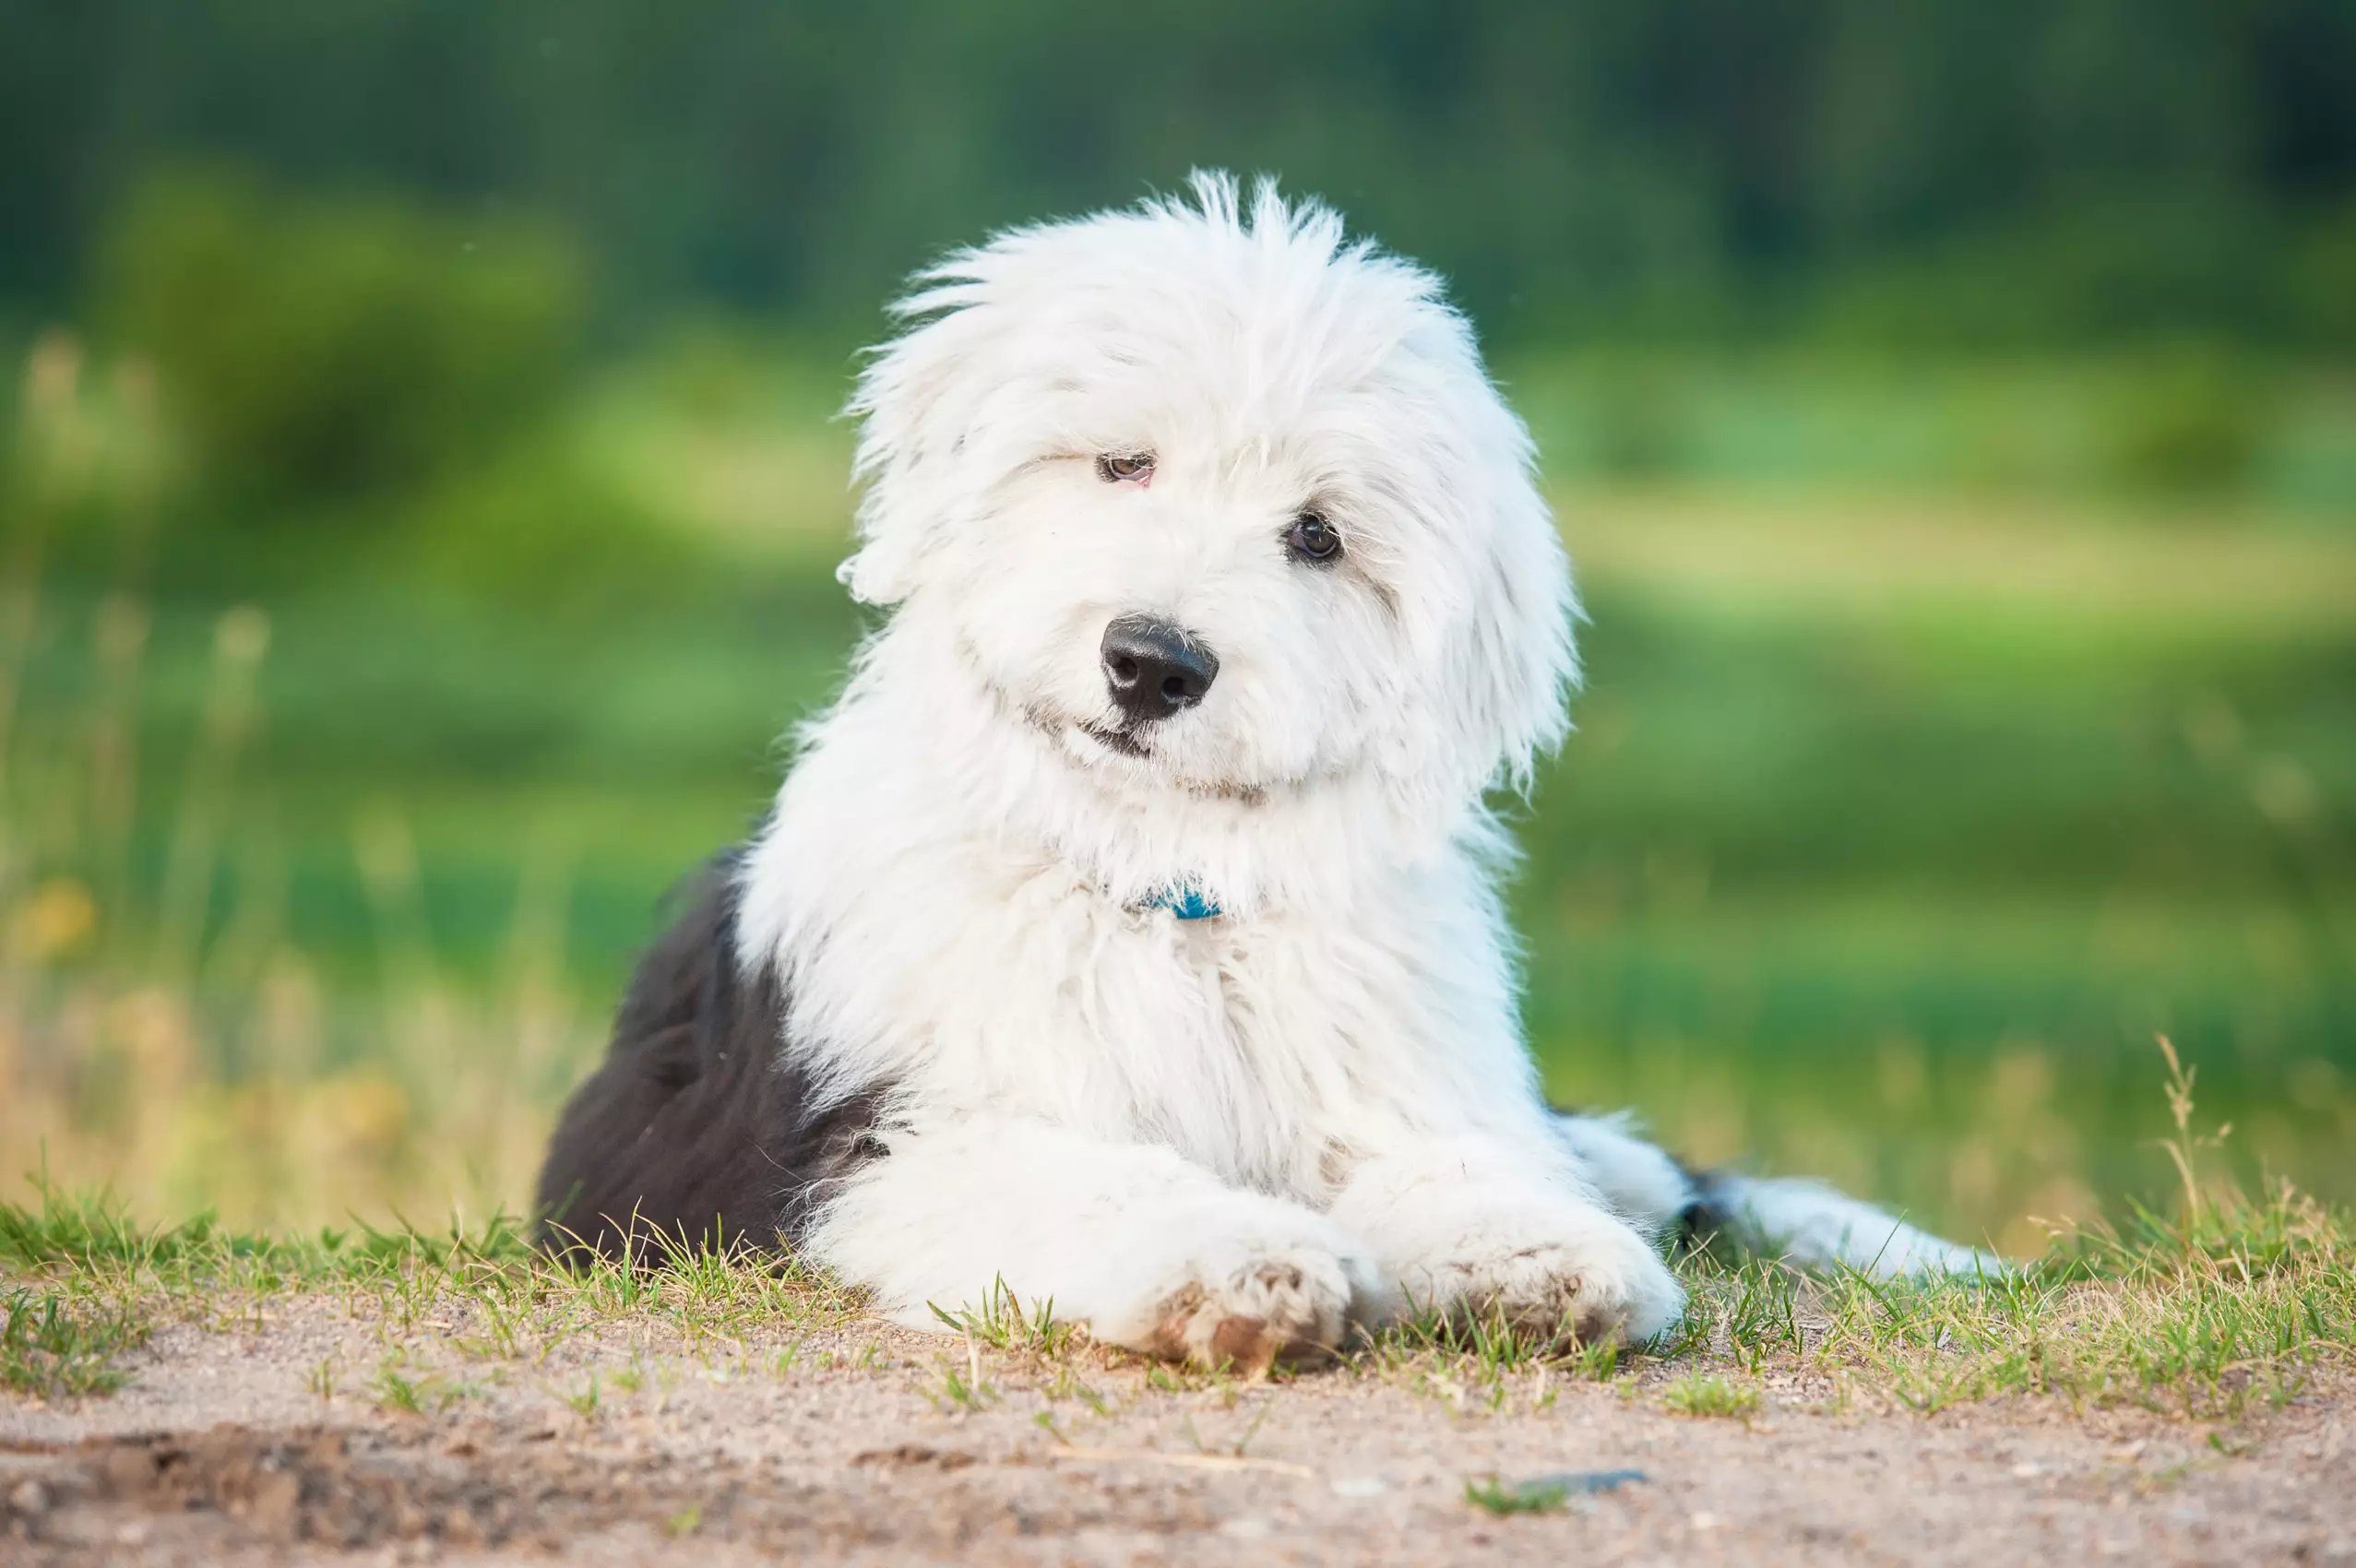 There were just 227 puppy registrations in the year of 2020 (